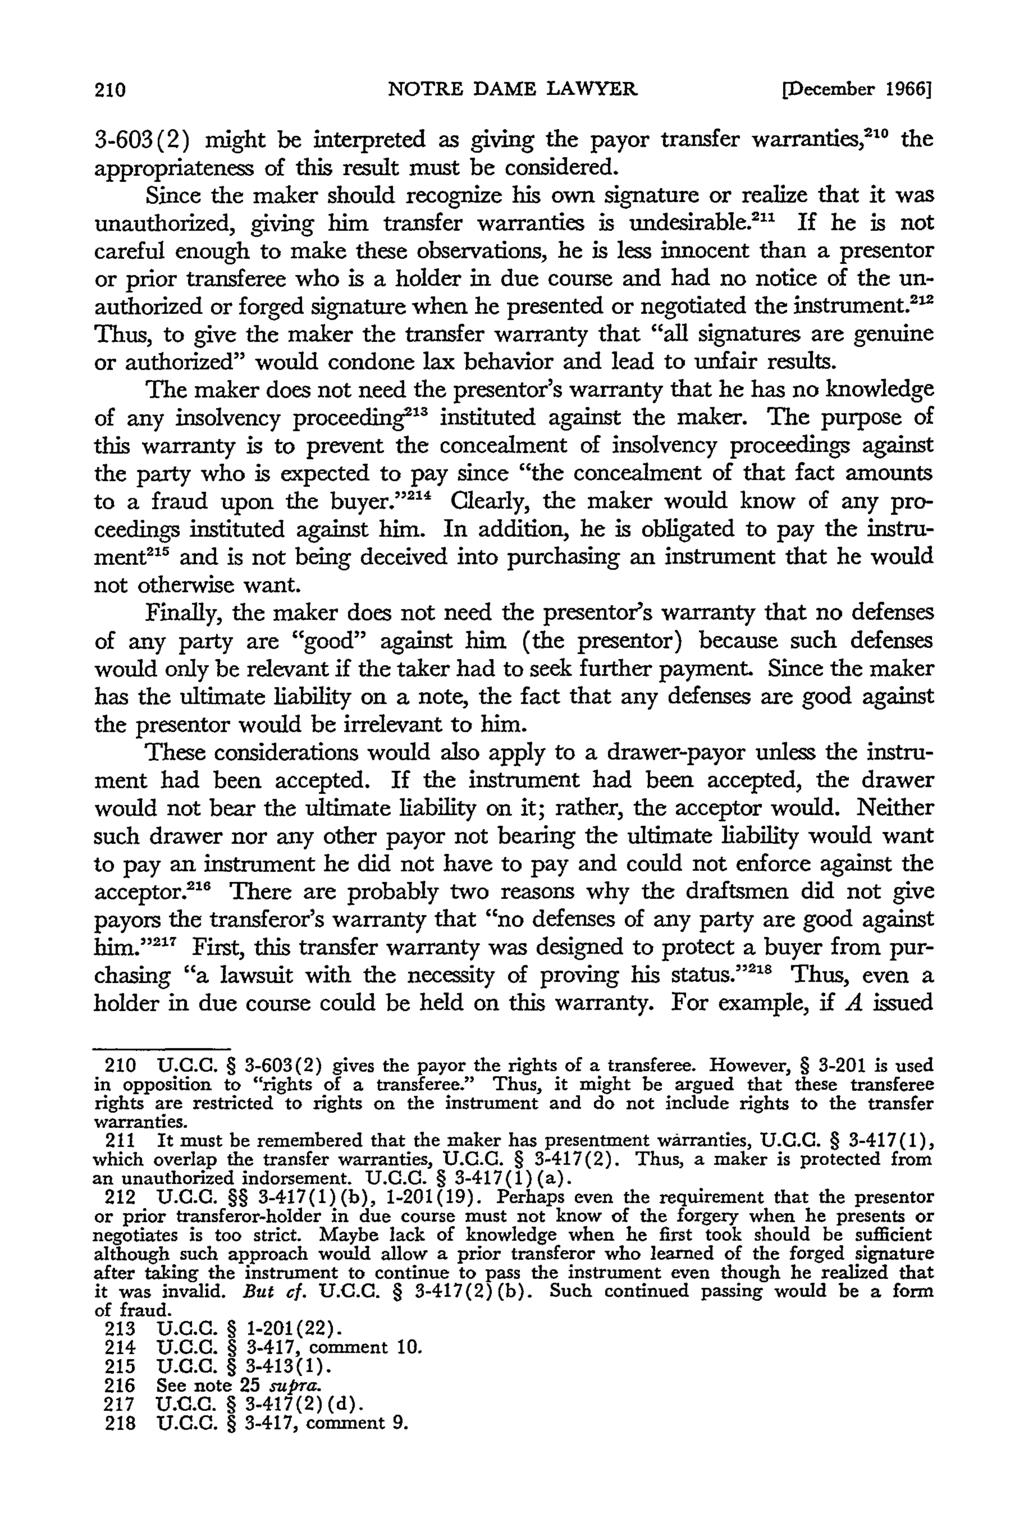 NOTRE DAME LAWYER [December 1966] 3-603 (2) might be interpreted as giving the payor transfer warranties,"' the appropriateness of this result must be considered.